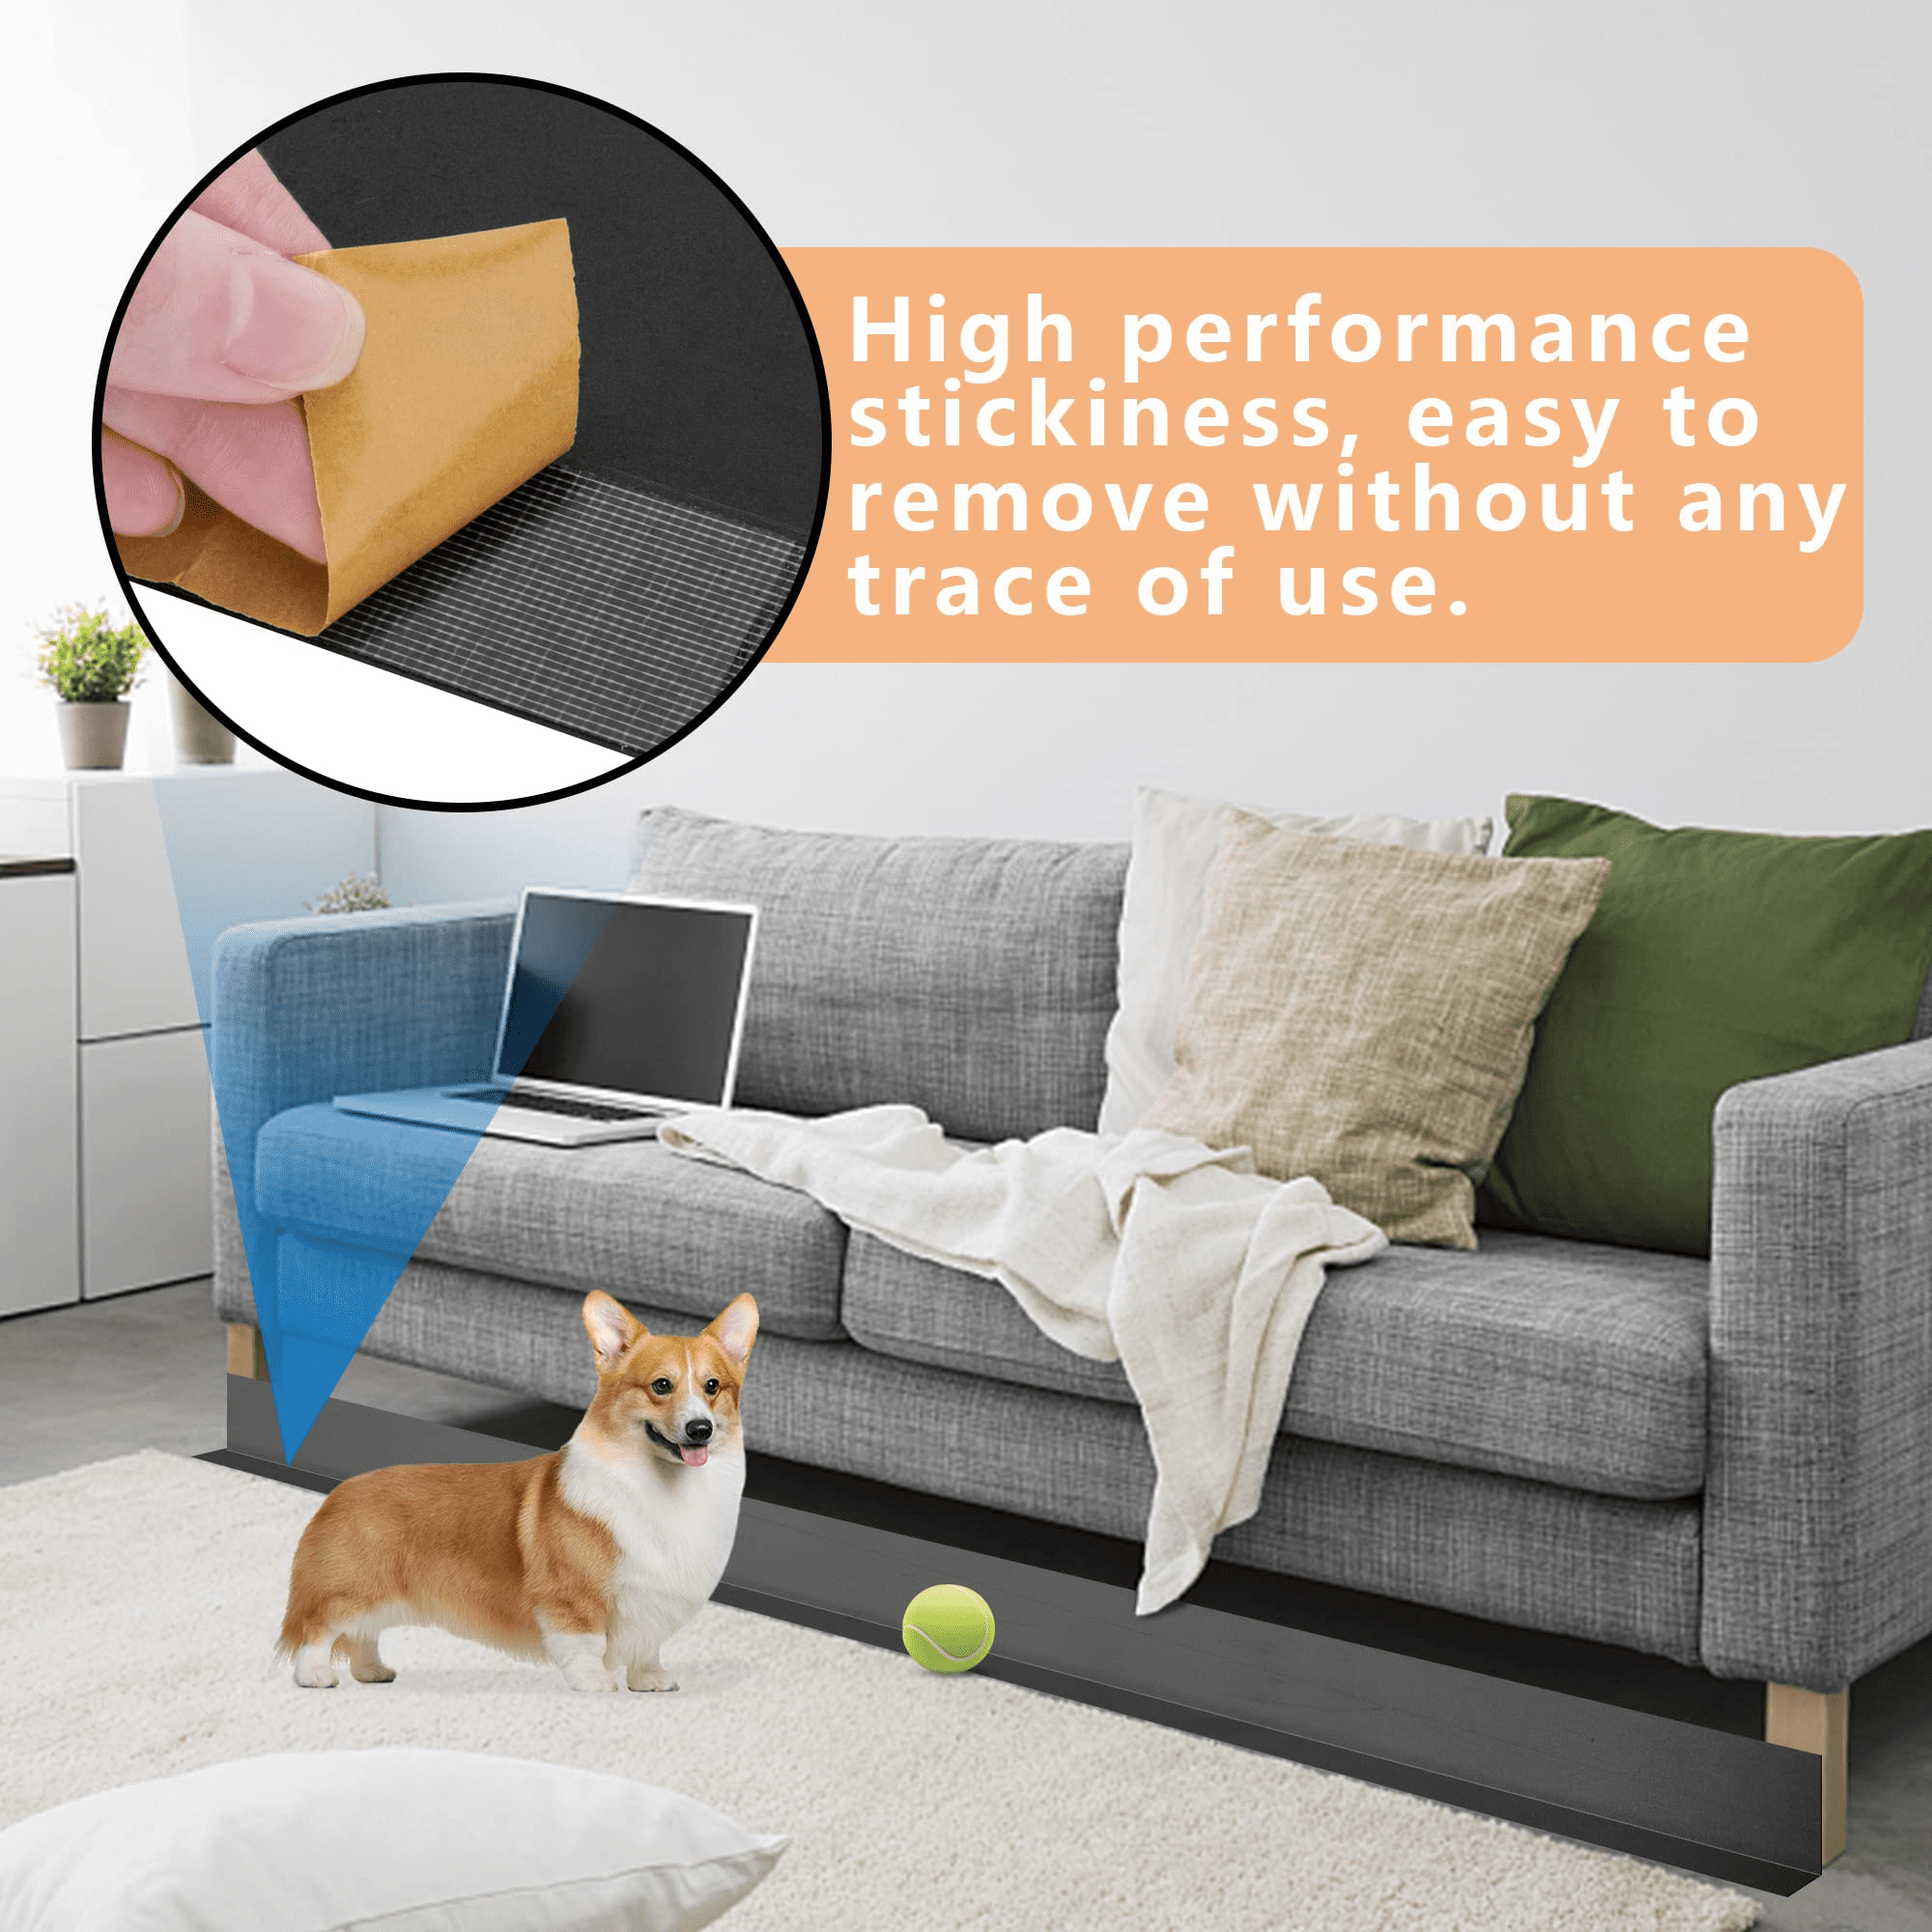 Under Couch Blocker,Adjustable Toy Blocker for Under Couch,Stop